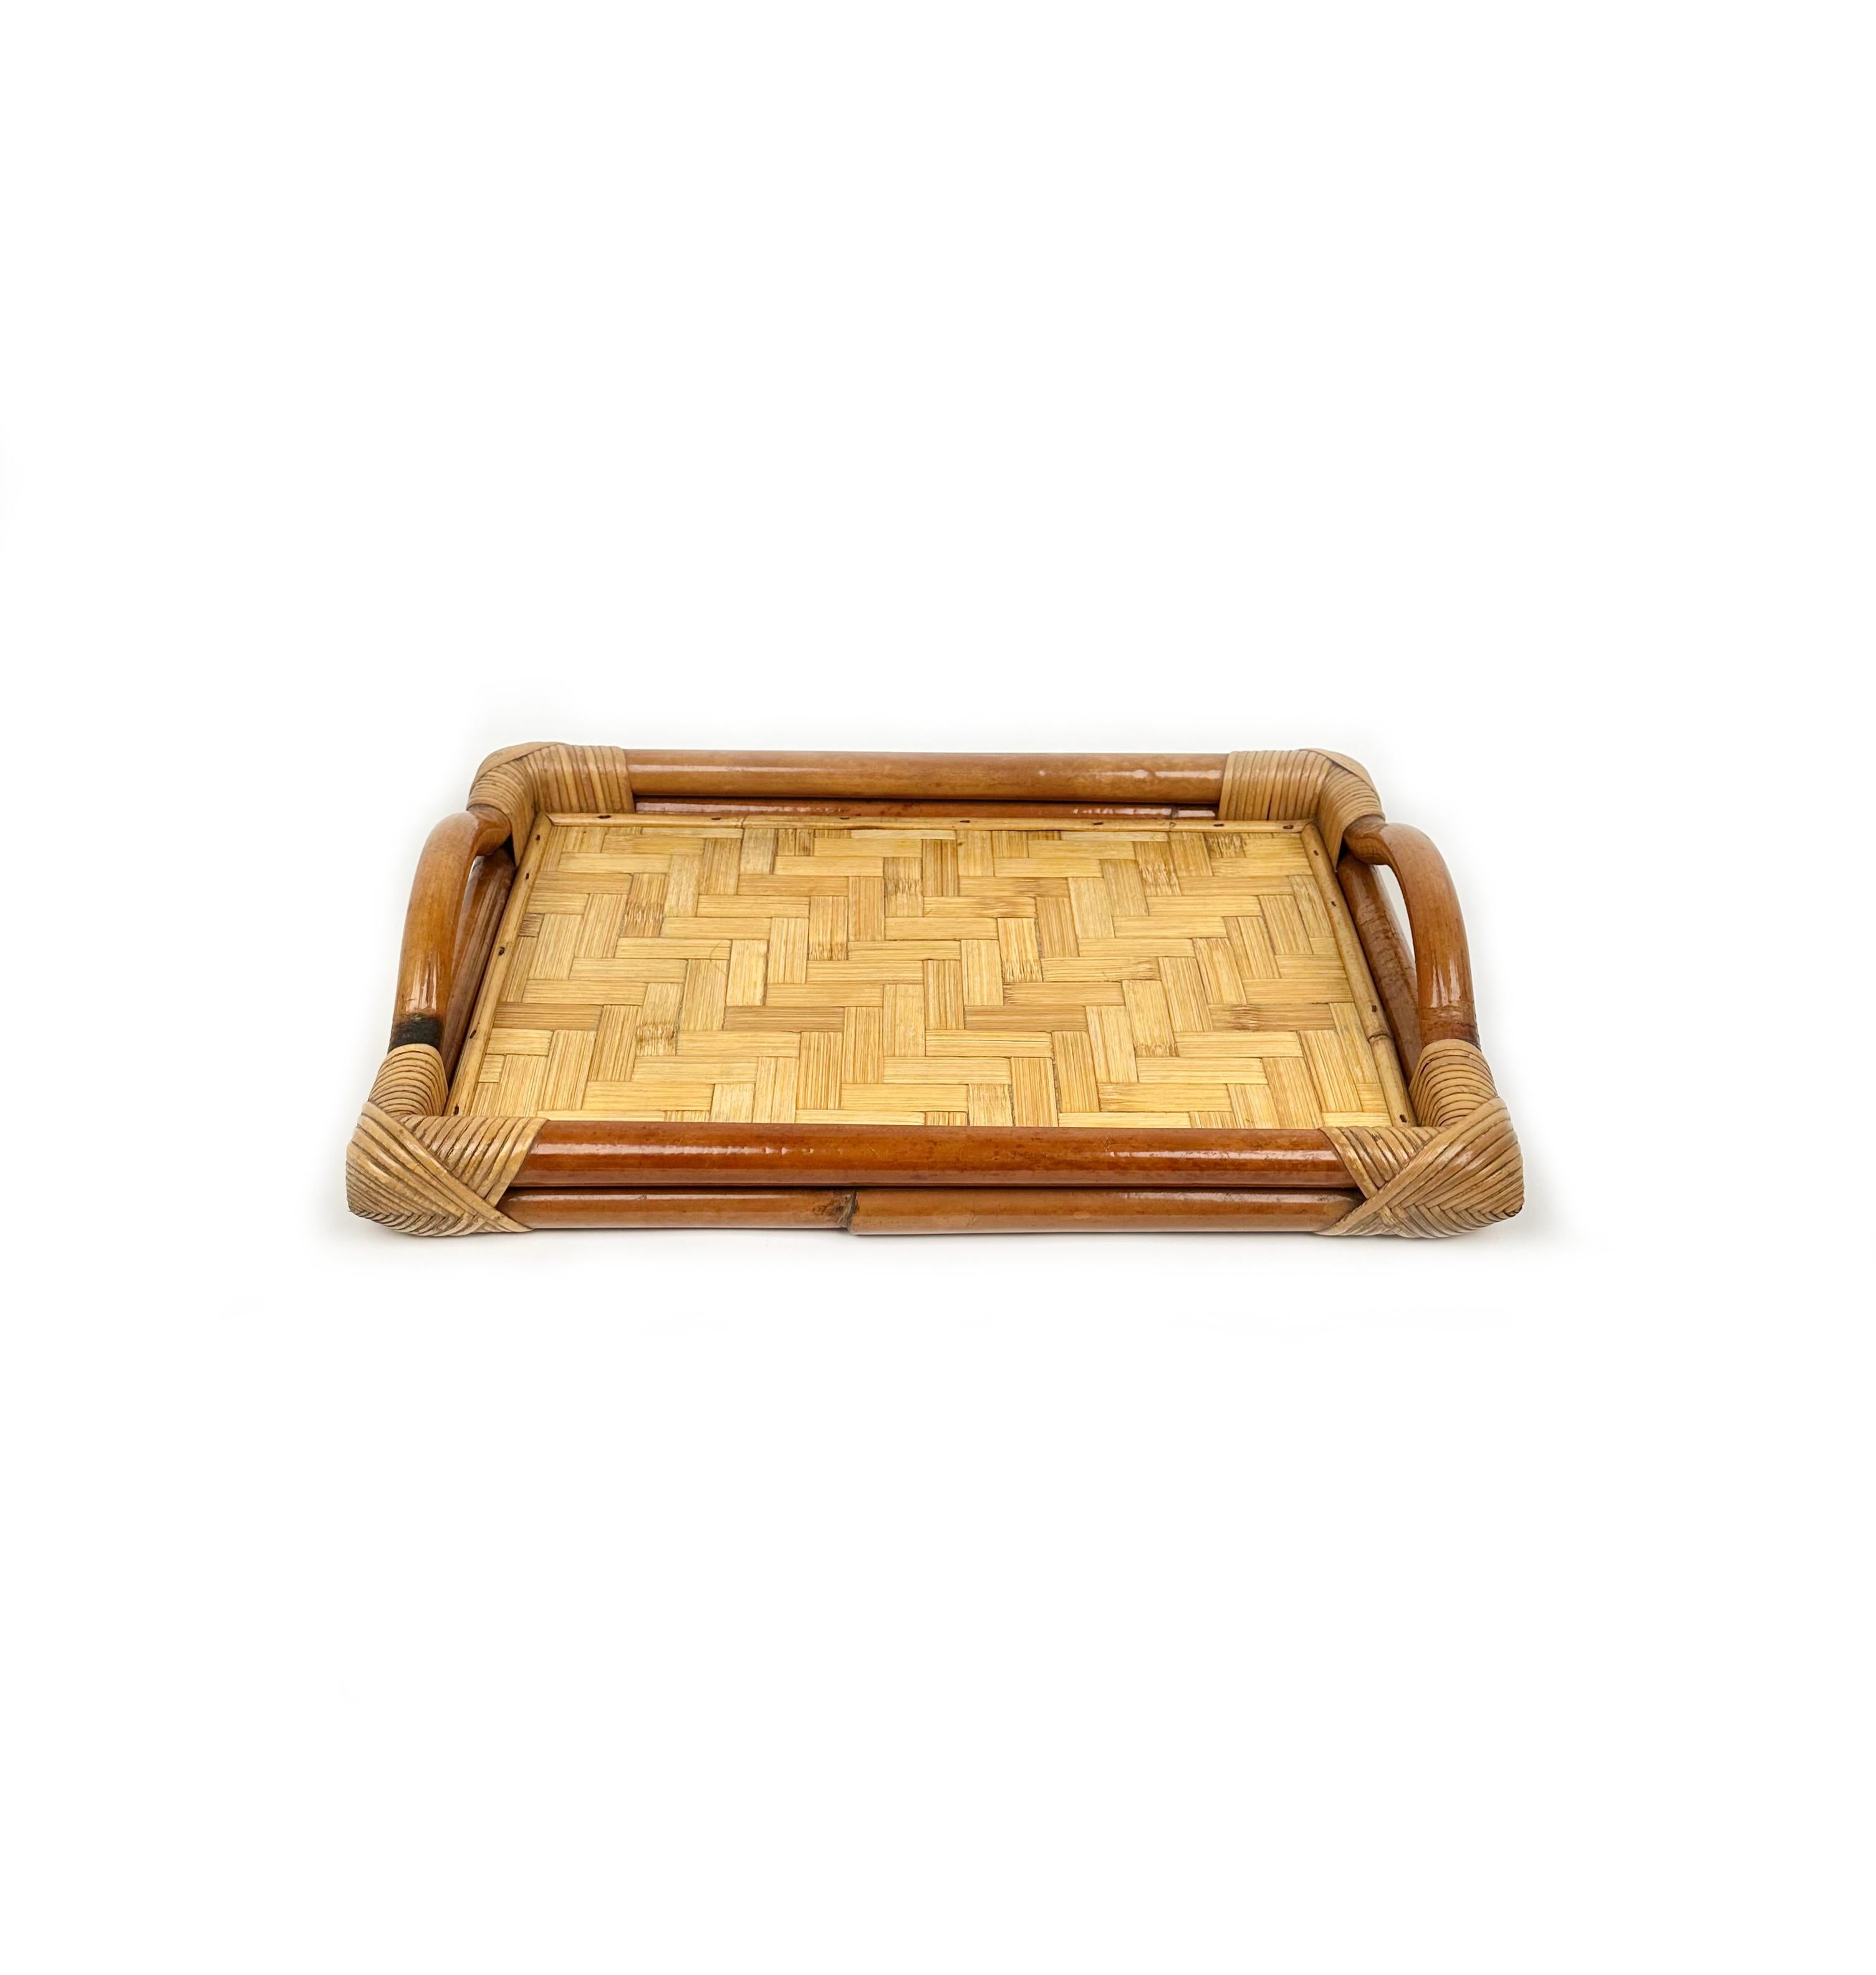 Rectangular serving tray in bamboo and rattan with handles. 

Made in Italy in the 1970s.